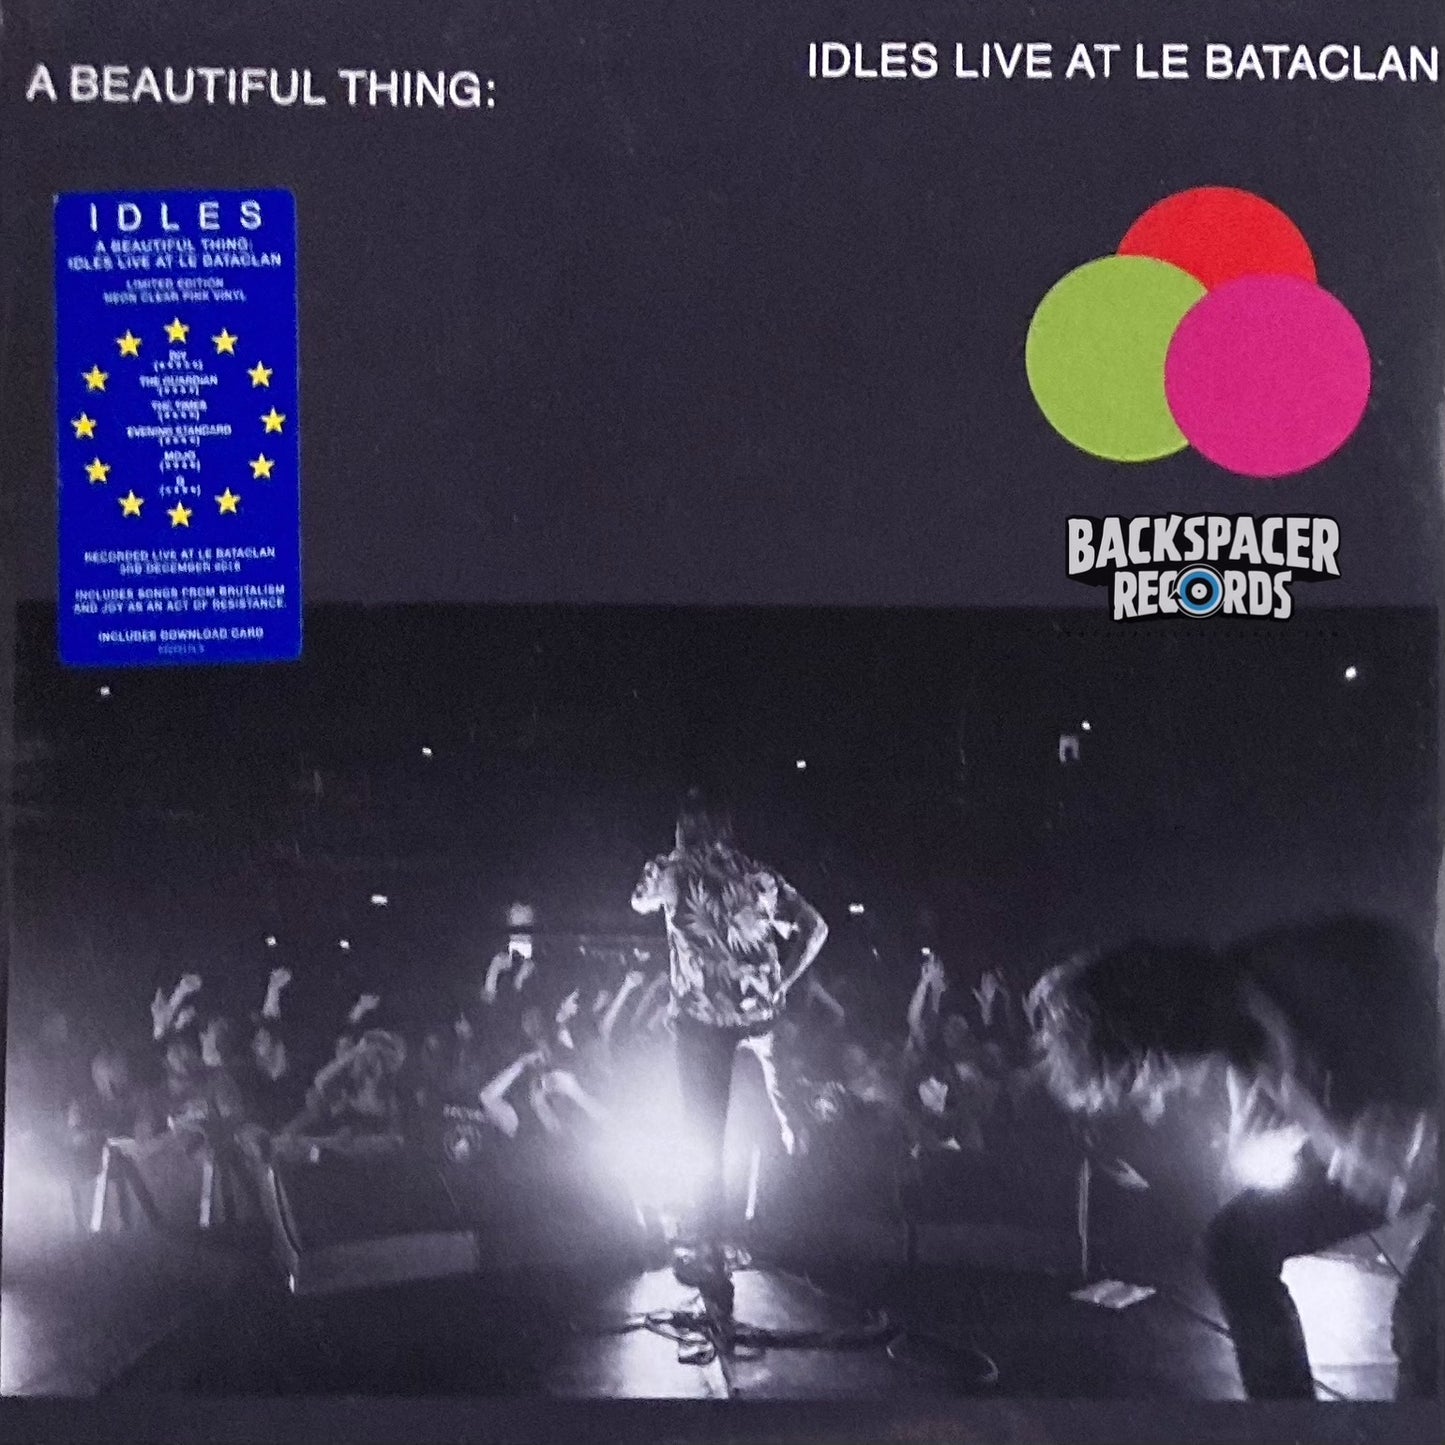 Idles ‎– A Beautiful Thing: Idles Live At Le Bataclan (Limited Edition) LP (Sealed)